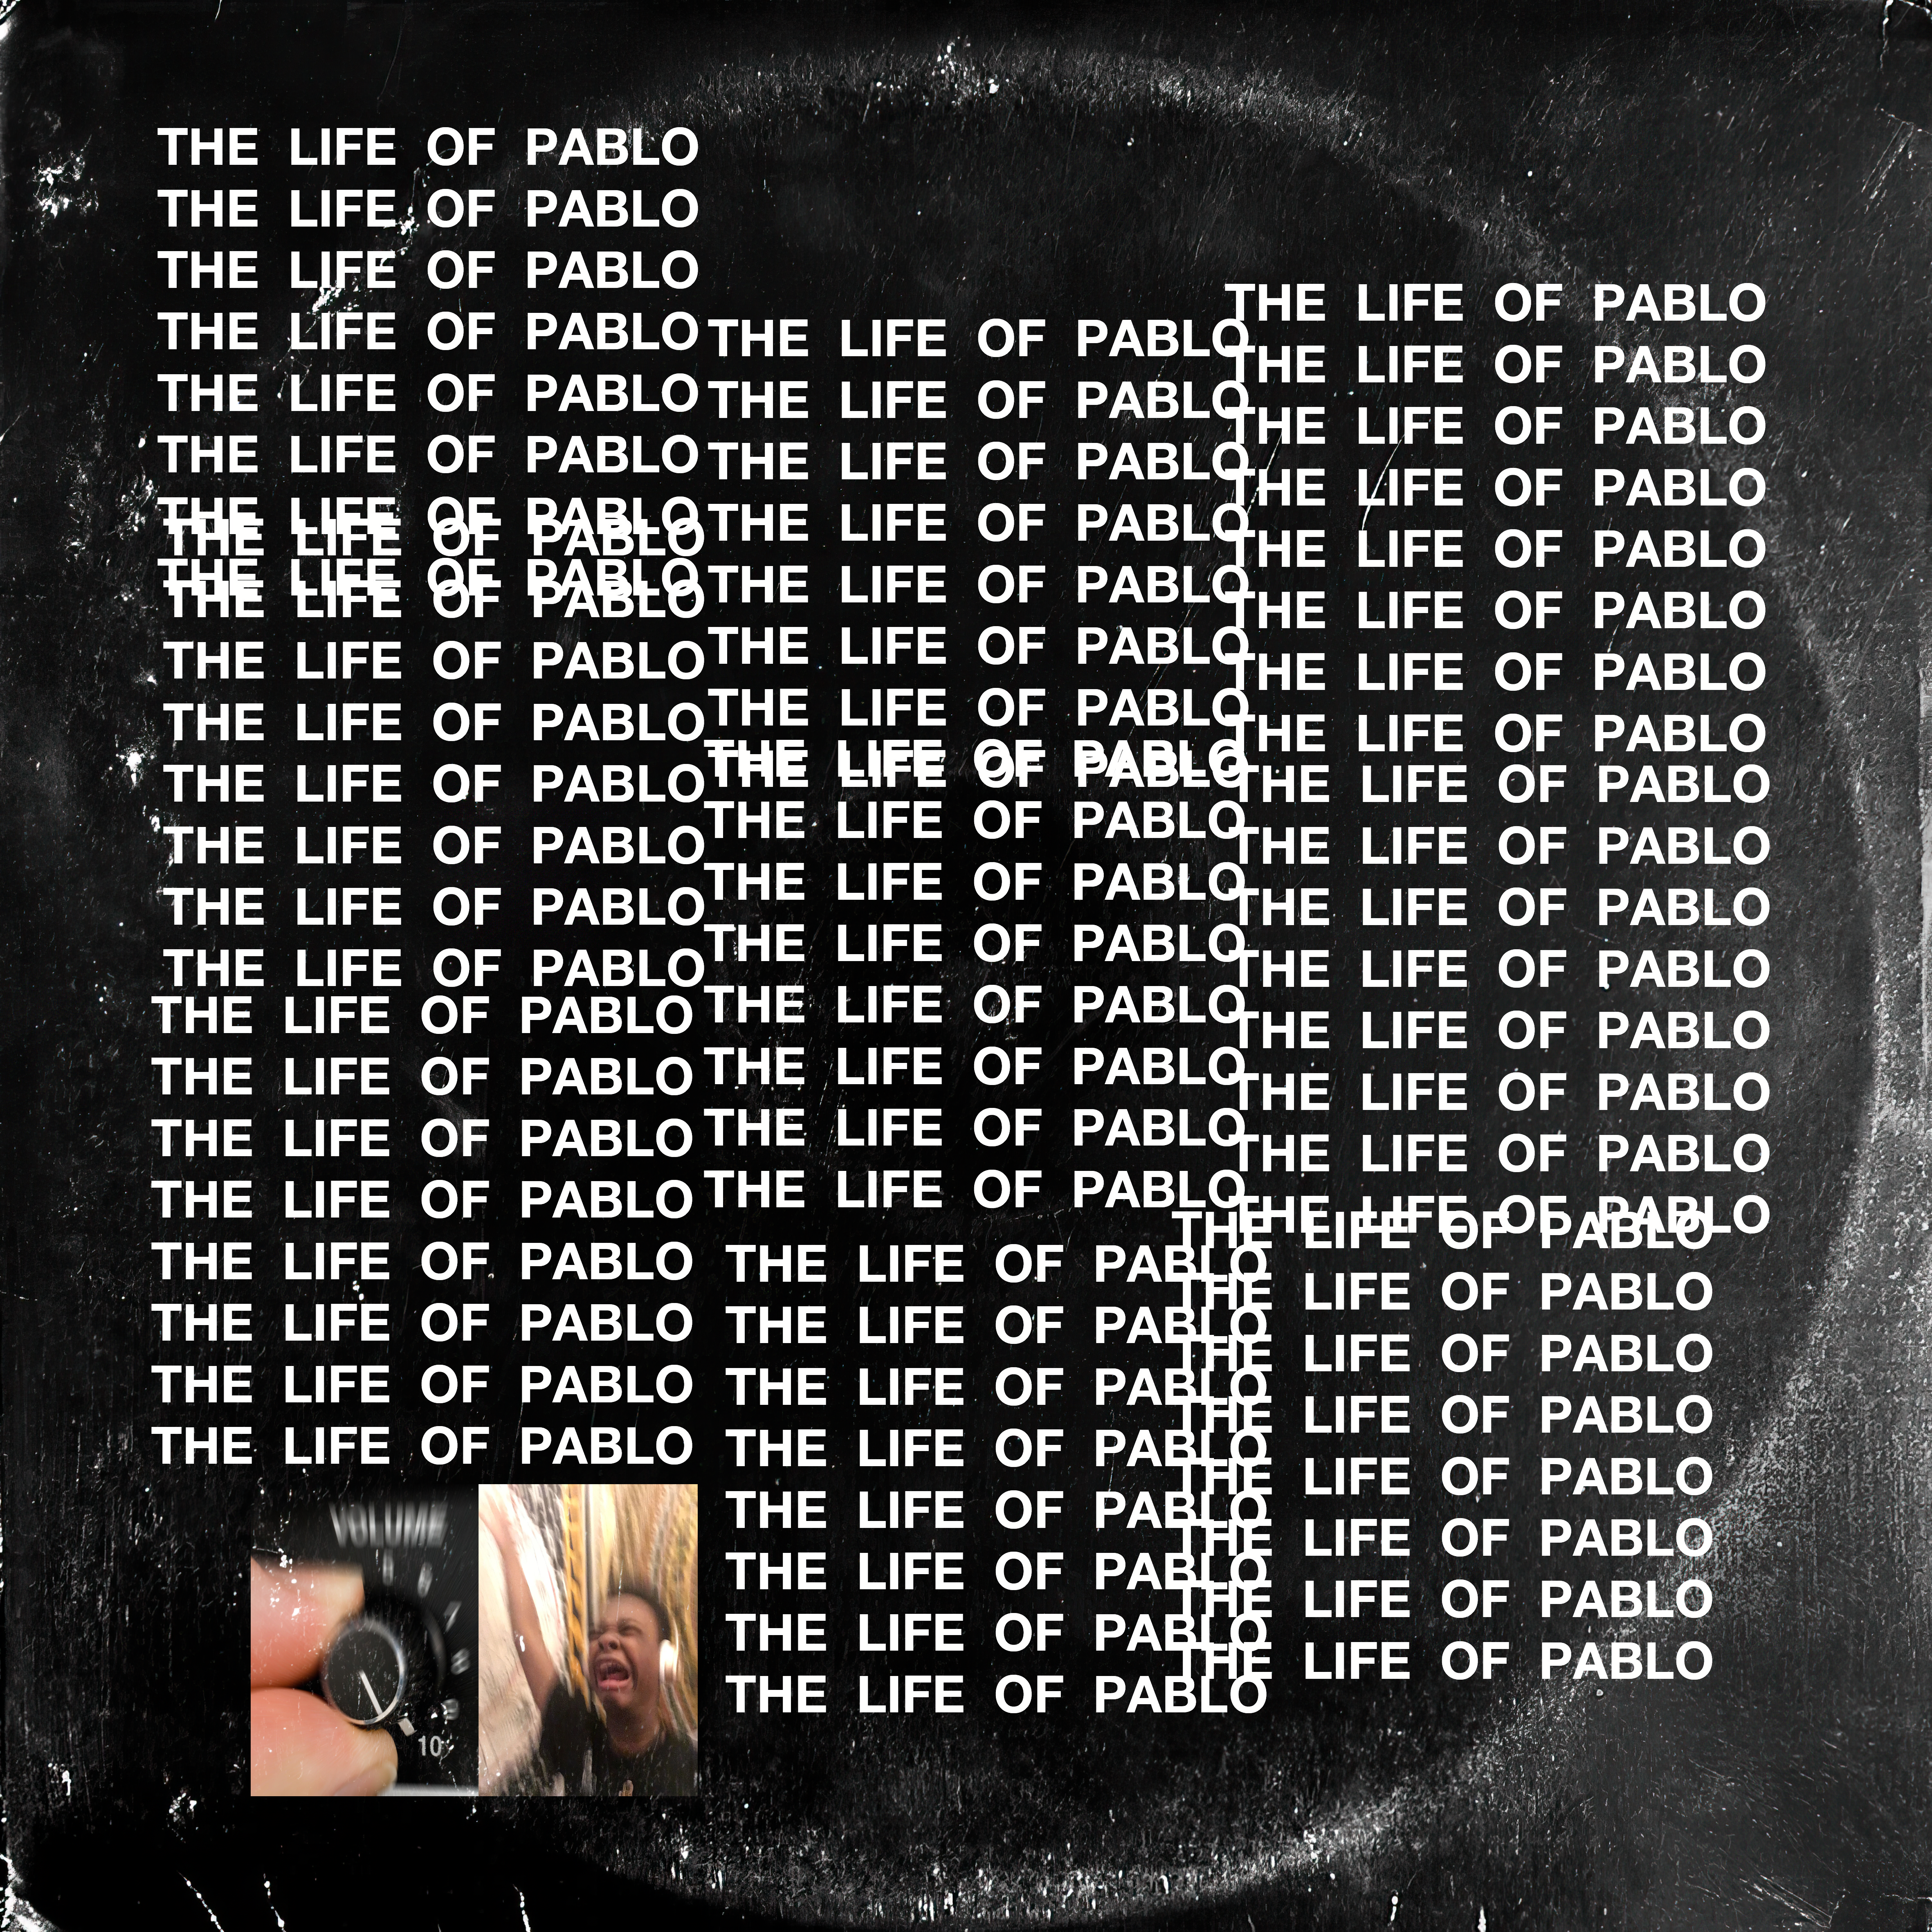 alternate cover for kanye west's the life of pablo clean version